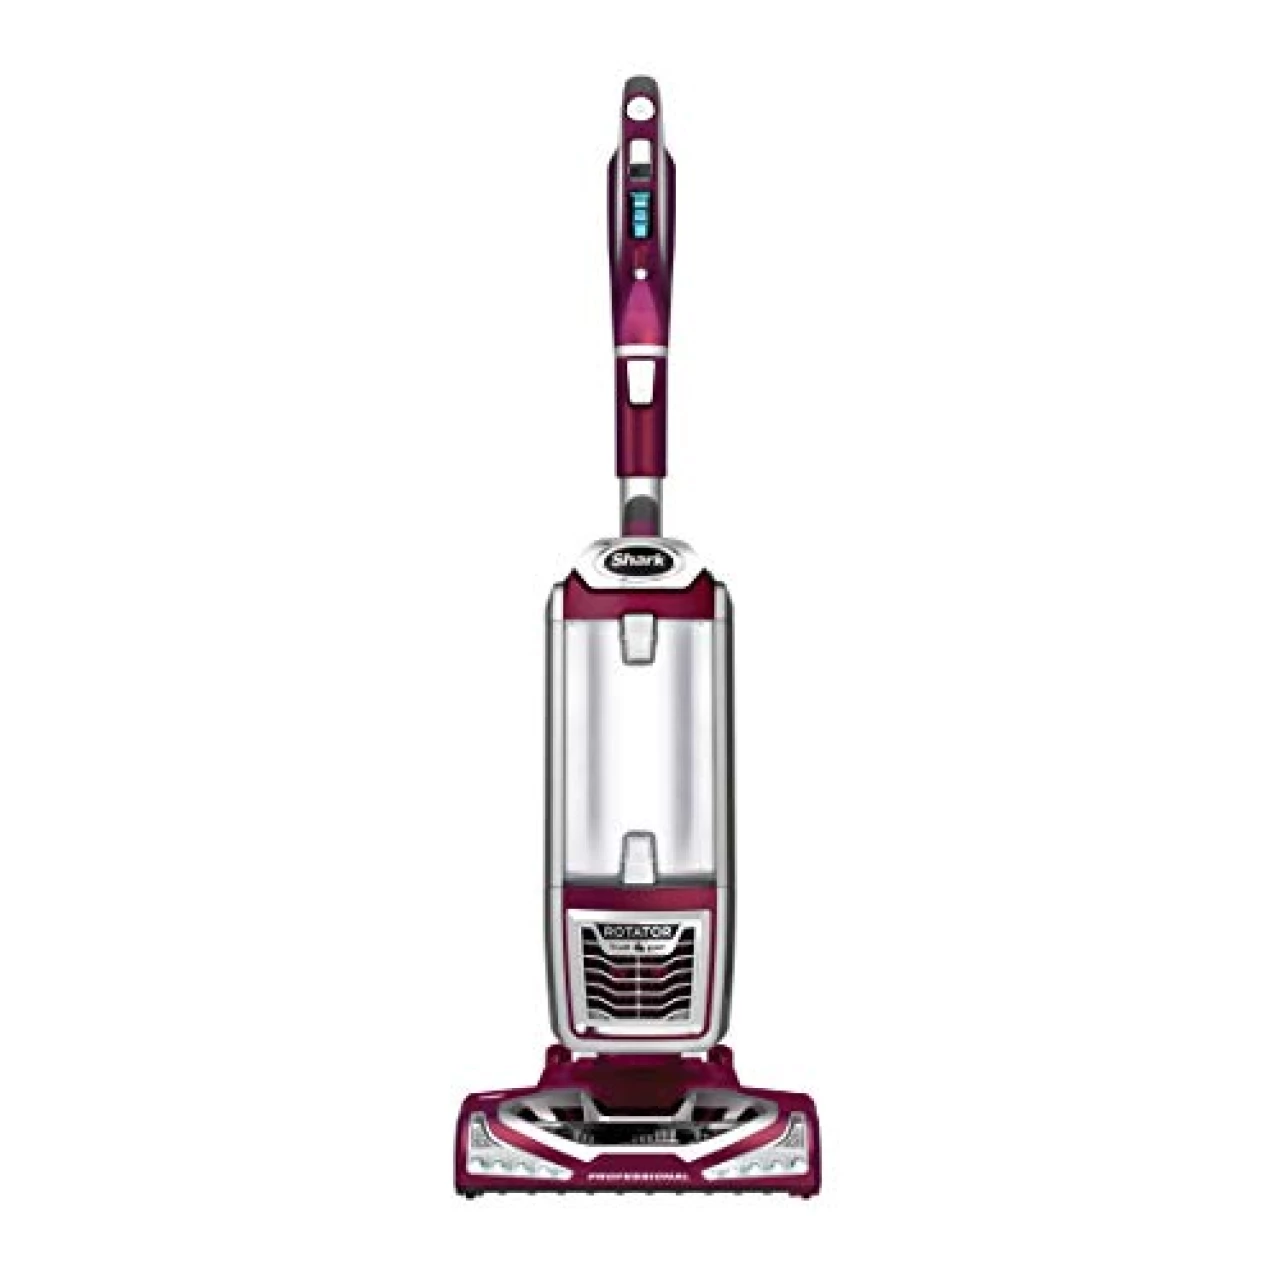 Shark NV752 Rotator Powered Lift-Away TruePet Upright Vacuum with HEPA Filter, Large Dust Cup Capacity, LED Headlights, Upholstery Tool, Pet Power Brush &amp; Crevice Tool, Perfect for Pets, Bordeaux